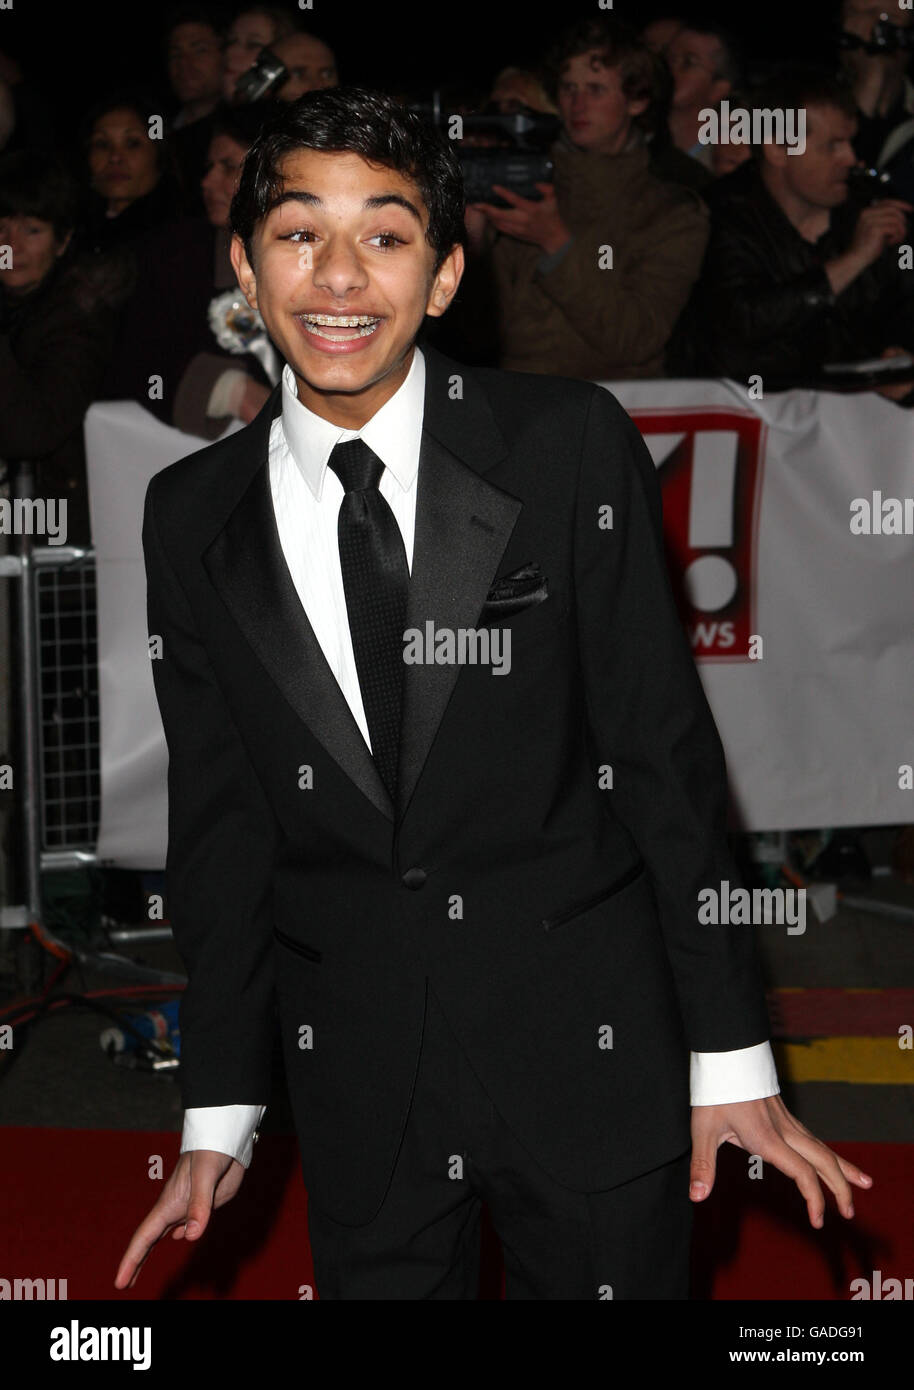 Mark Indelicato arriving for the 2007 National Televsision Awards (NTA's) at the Royal Albert Hall, west London. Stock Photo